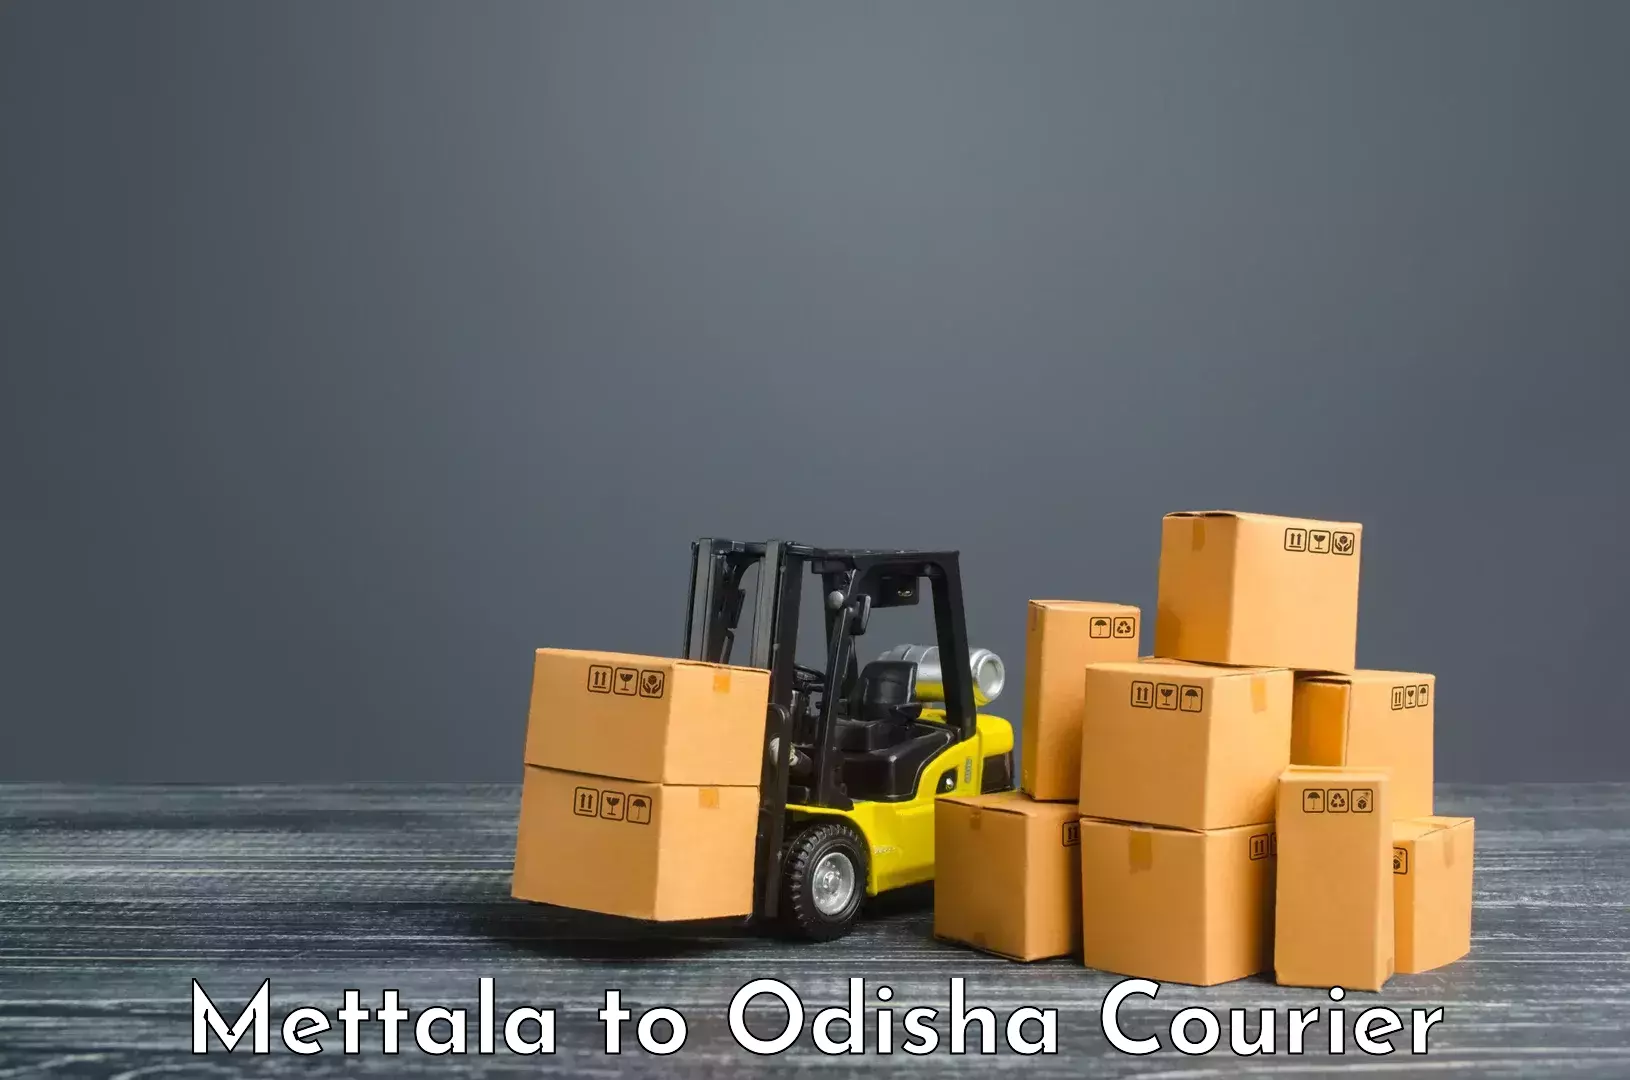 Advanced shipping technology in Mettala to Telkoi